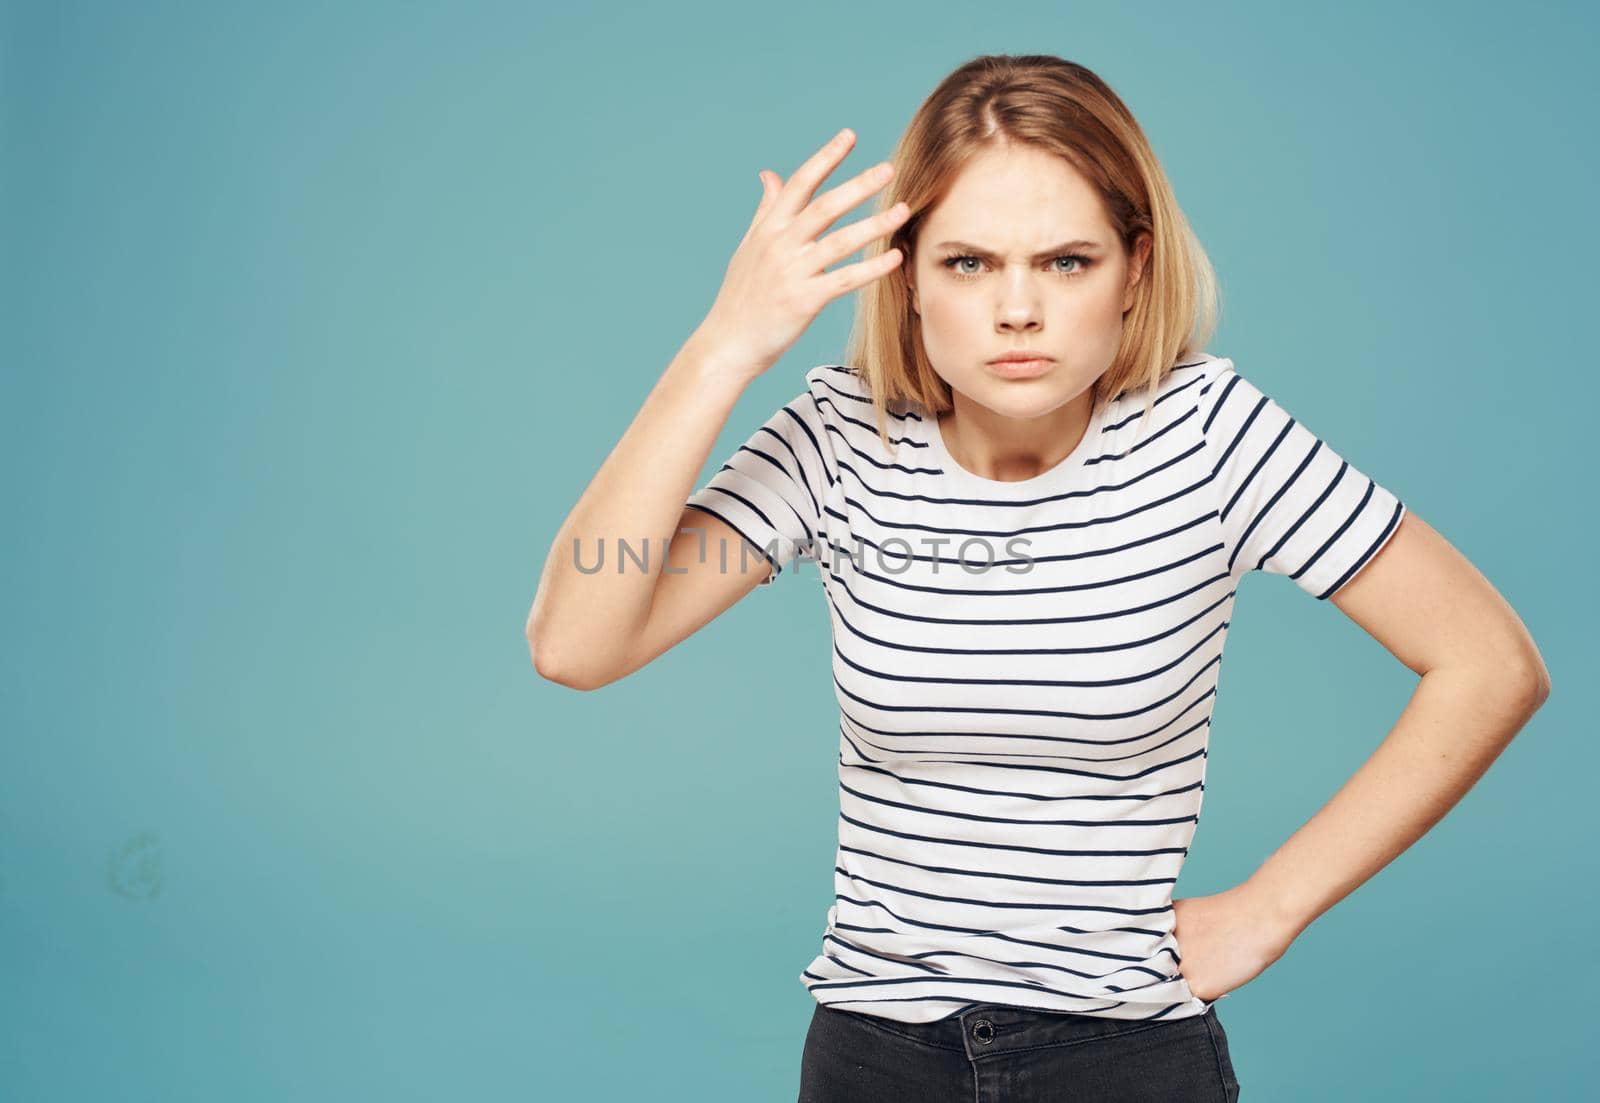 Nervous woman in a striped T-shirt gestures with her hands on a blue background. High quality photo